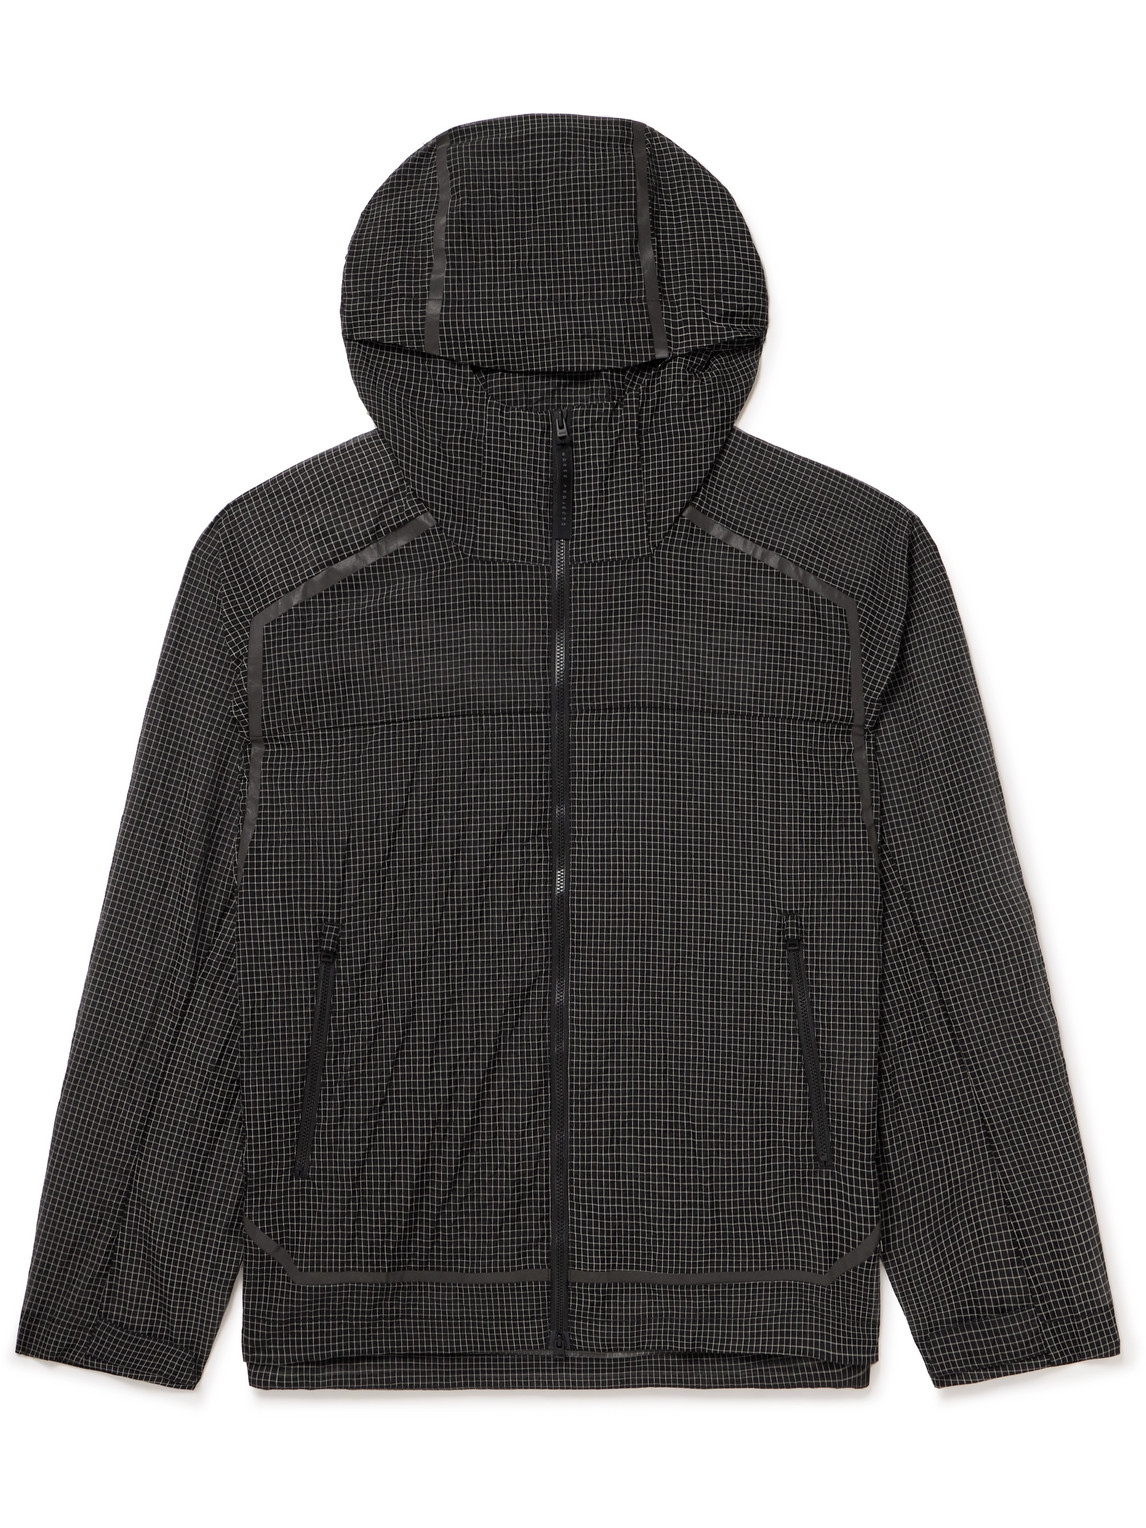 NORSE PROJECTS ARKTISK CHECKED RIPSTOP HOODED JACKET